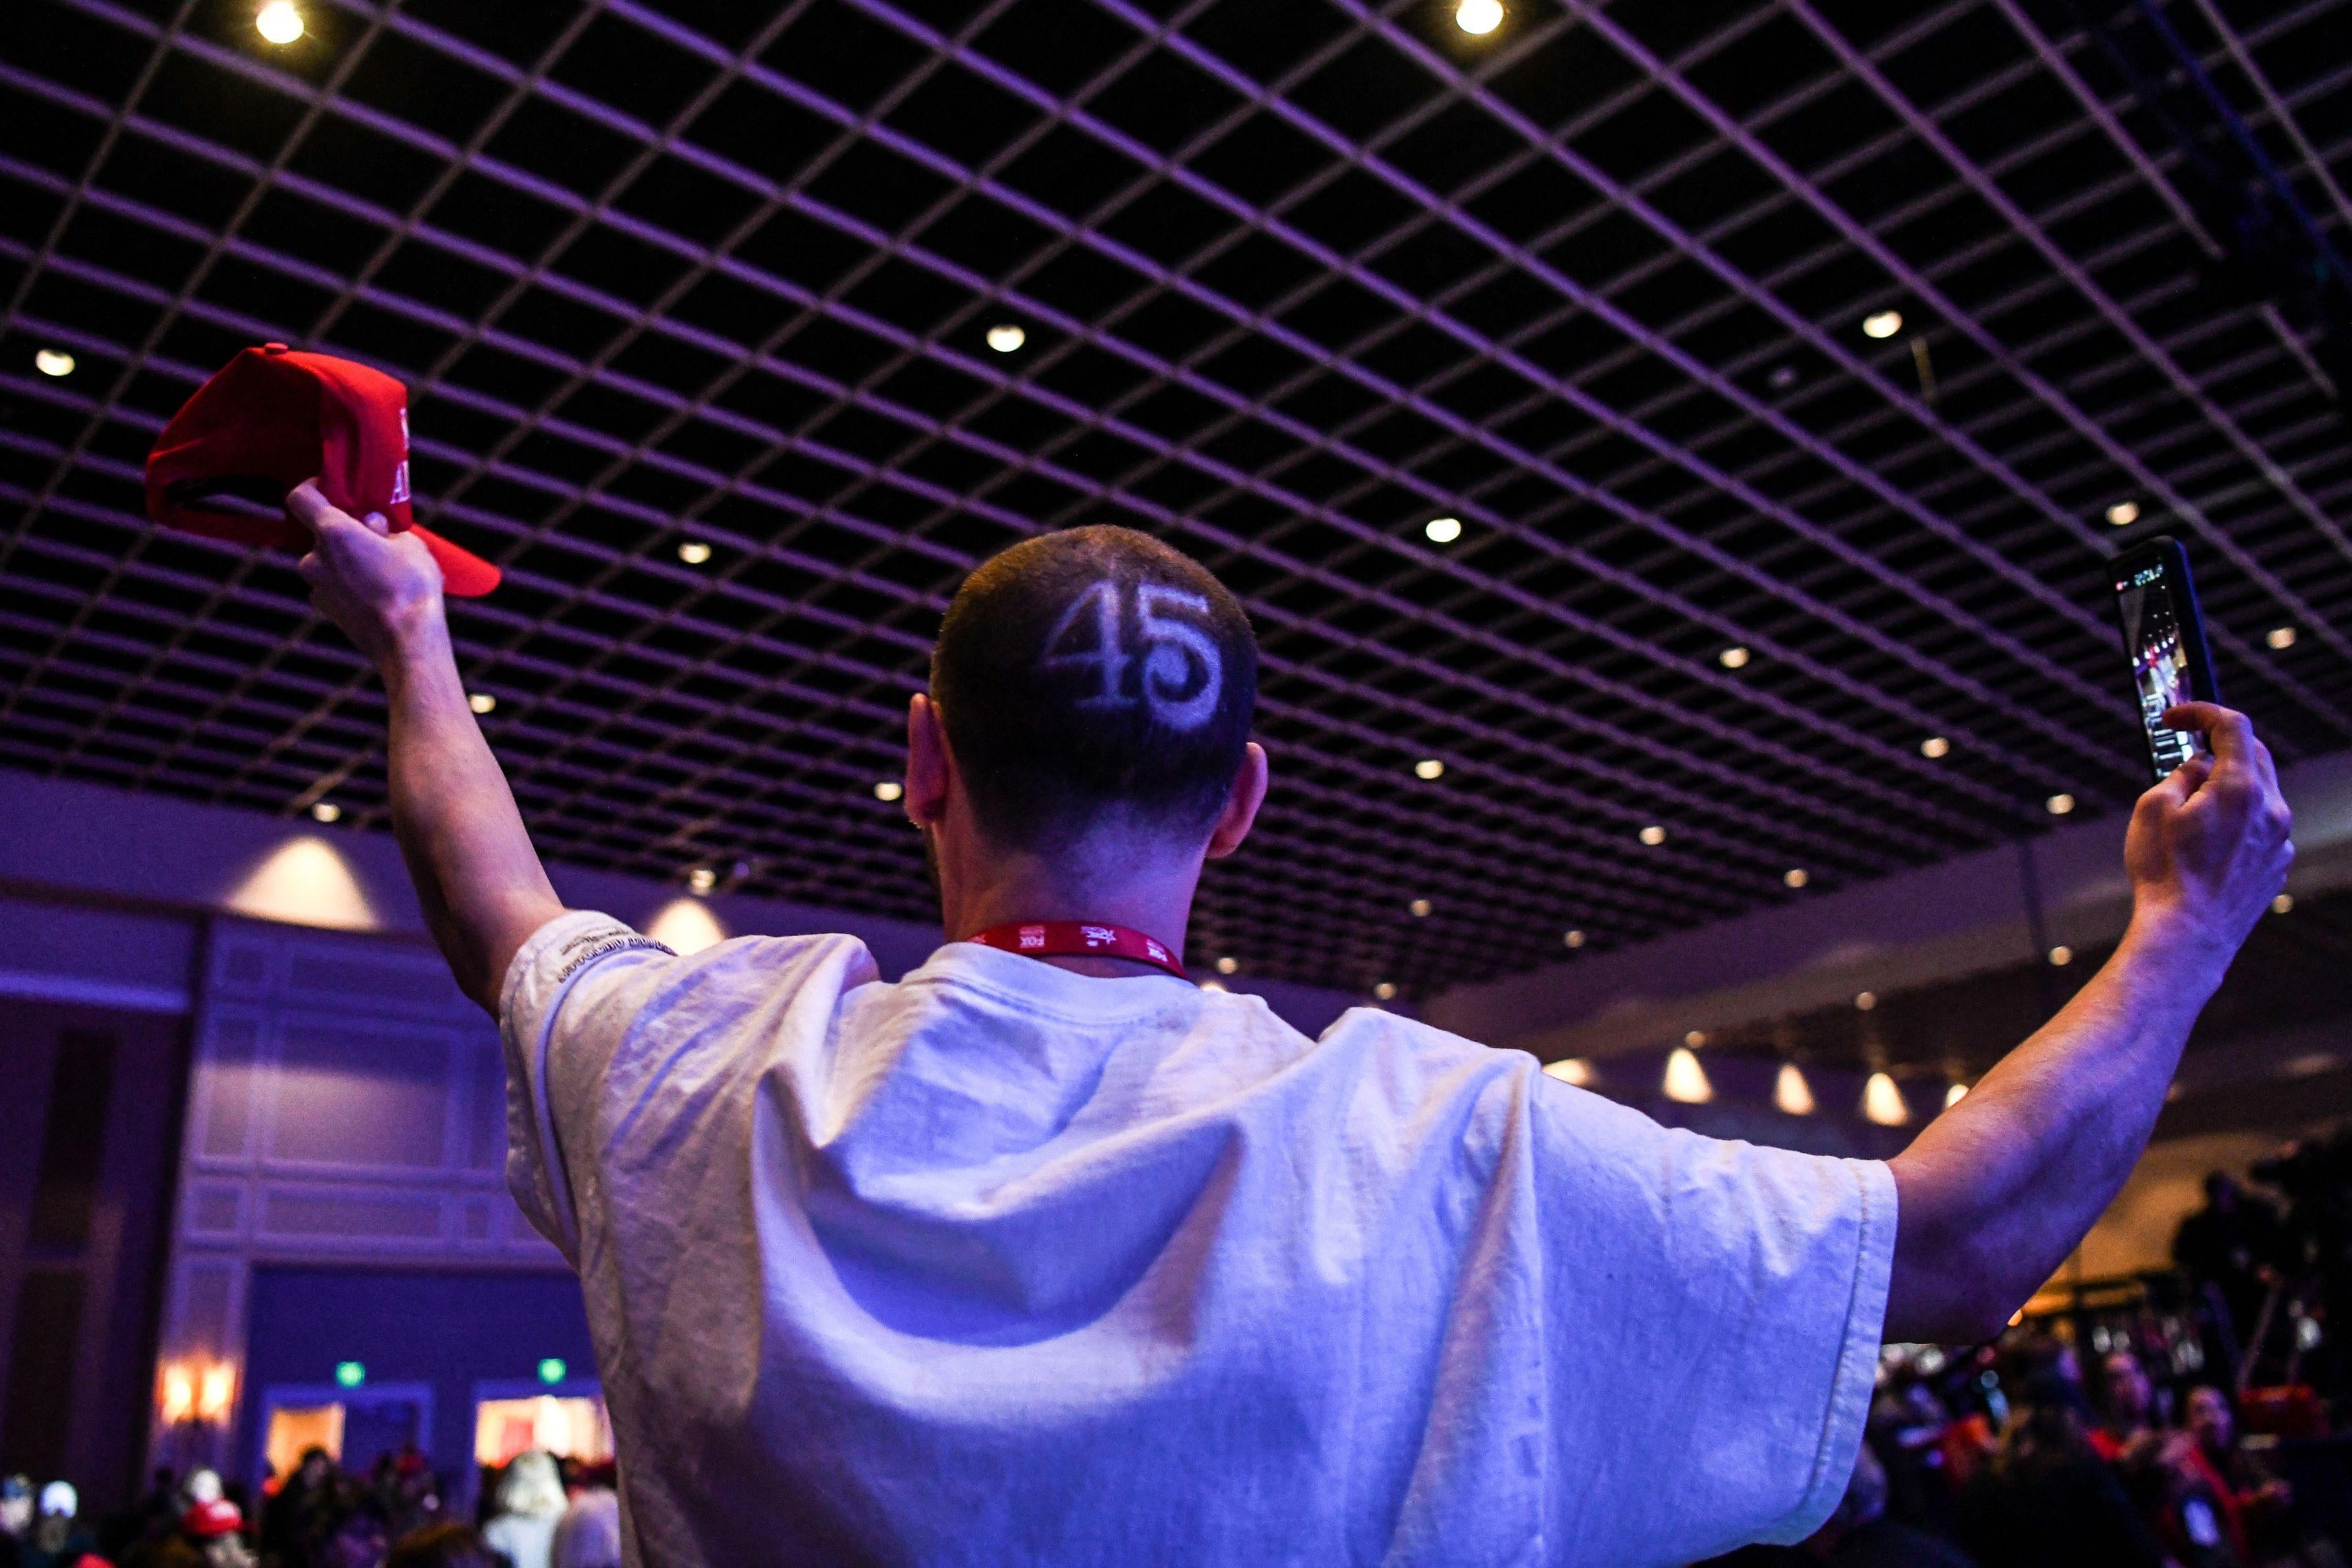 Man with the number 45 shaved onto his head shown from behind holding up a red MAGA hat in one hand and a phone in the other hand in a crowded room at CPAC